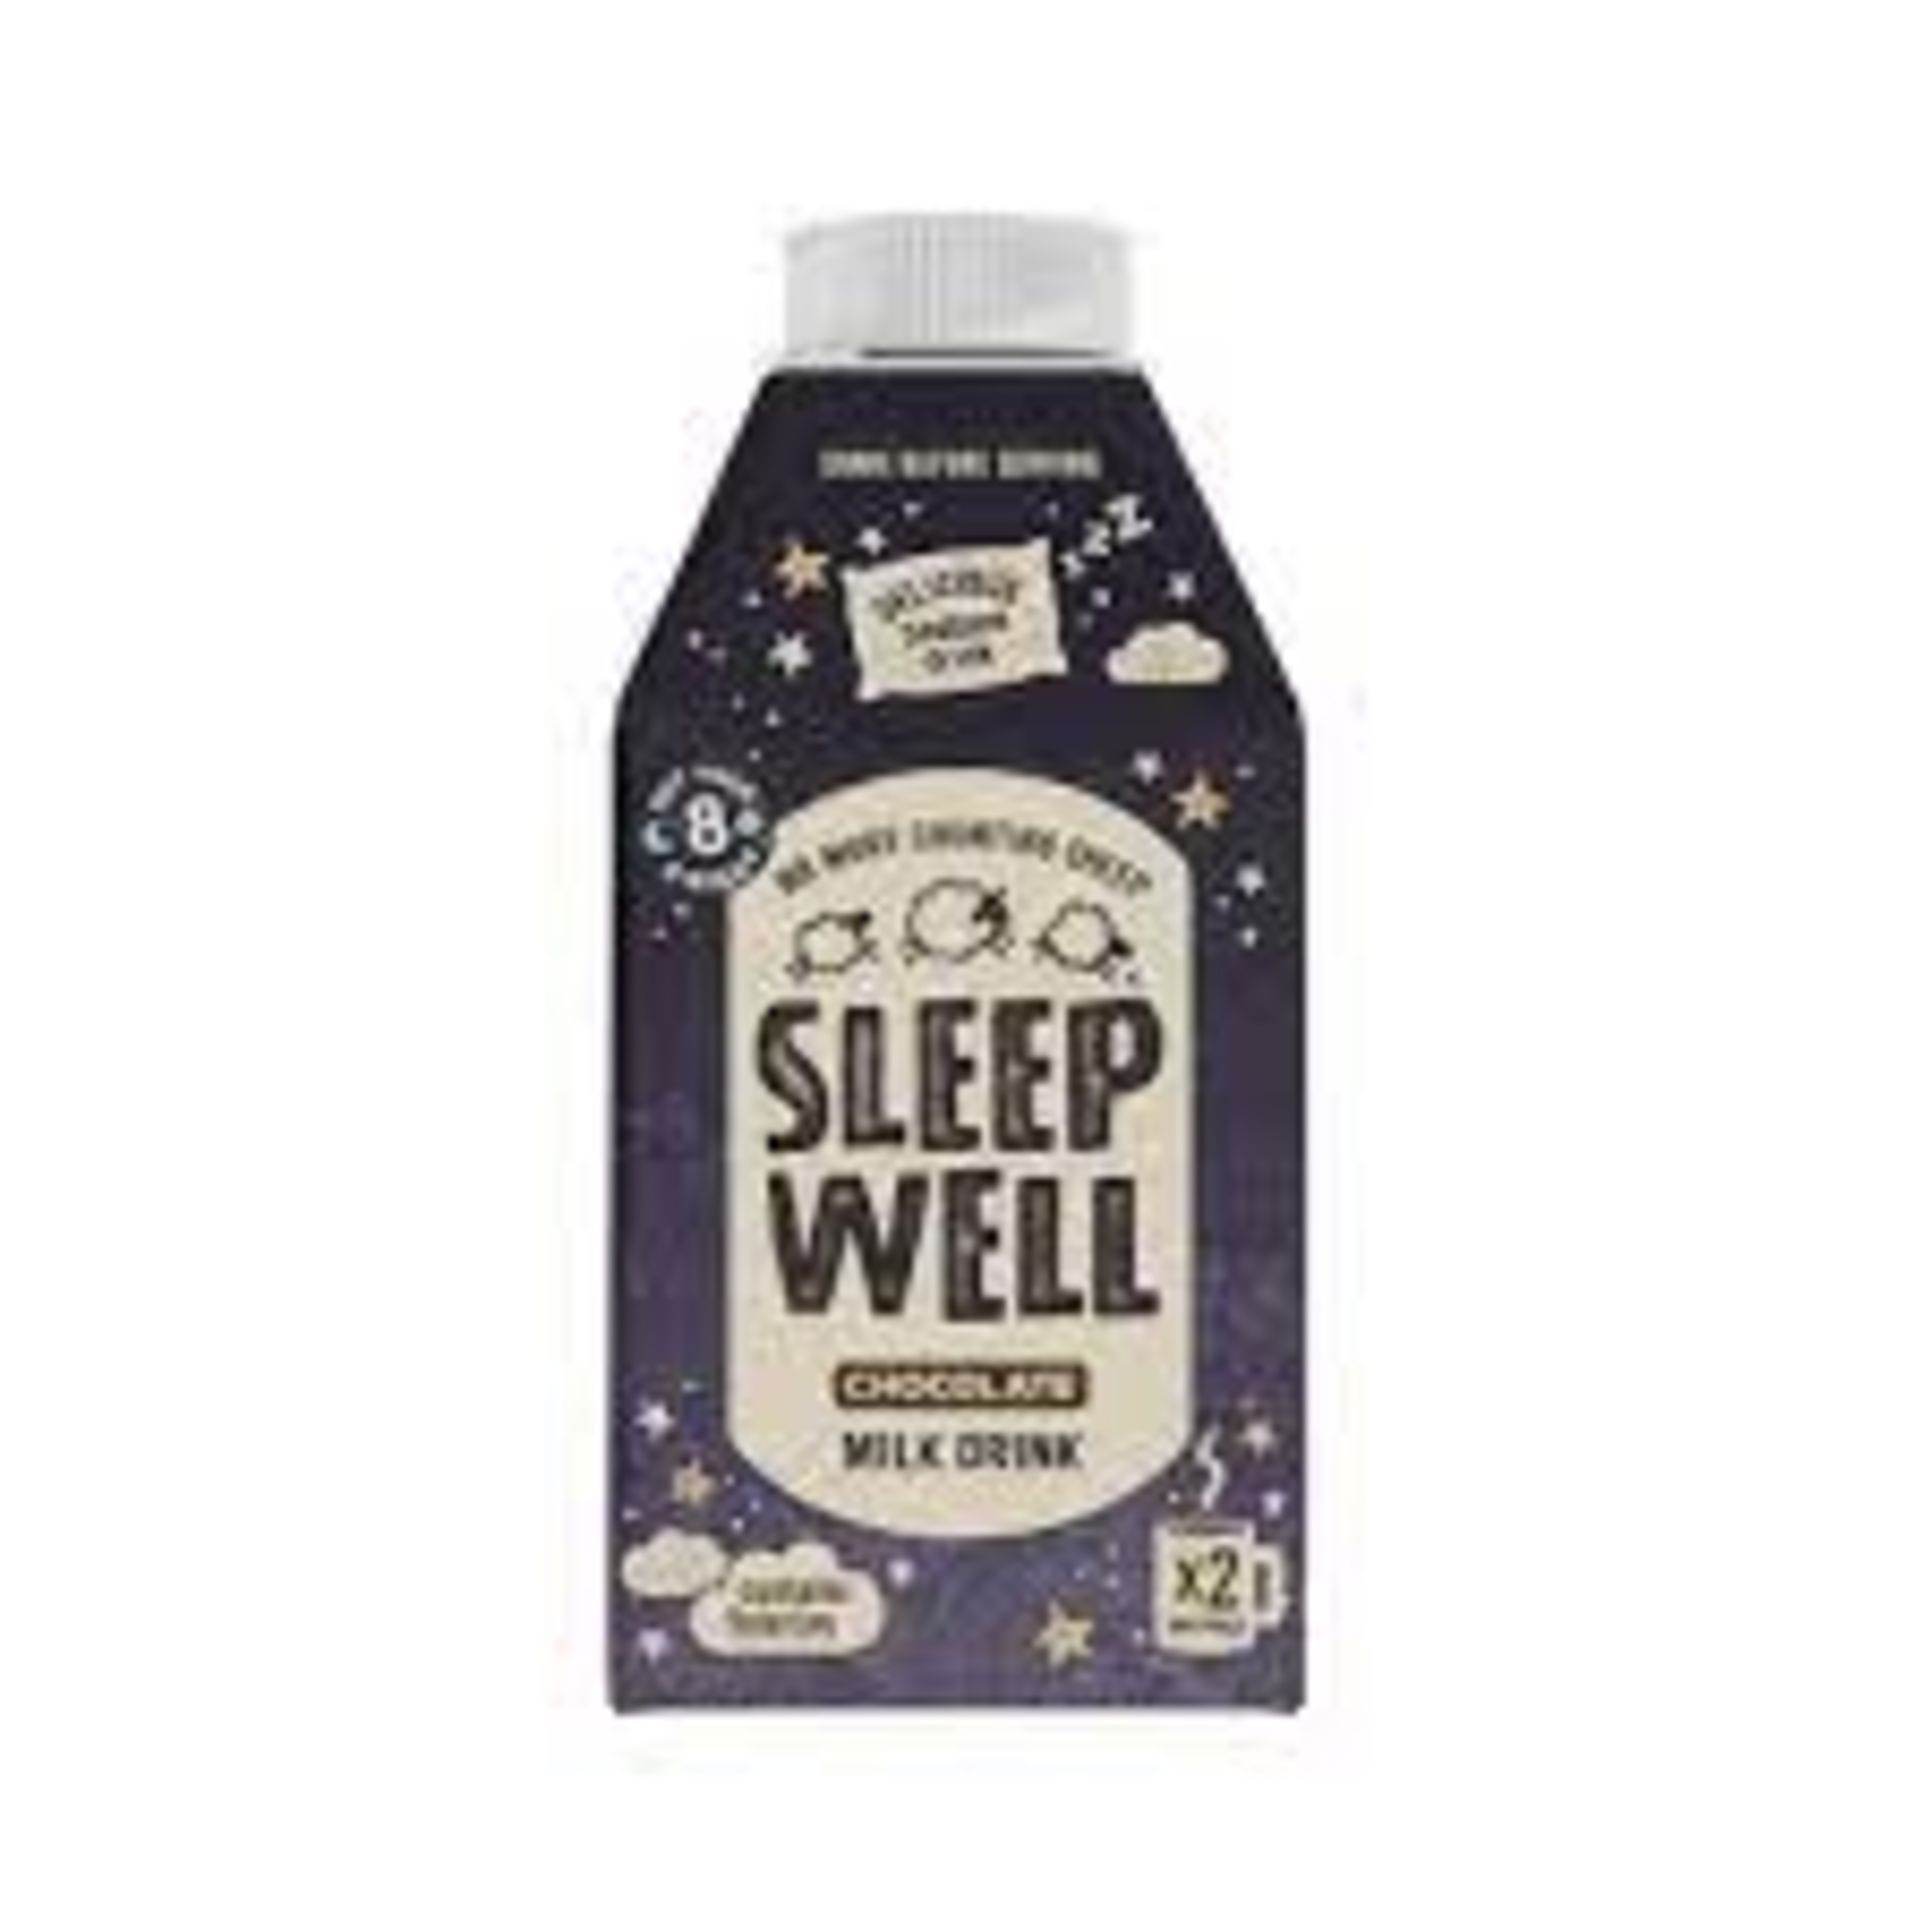 RRP £1025 (Approx. Count 96) (A45) spW14a3352b 2 x Sleep Well Chocolate Milk, 500ml, Case of 12